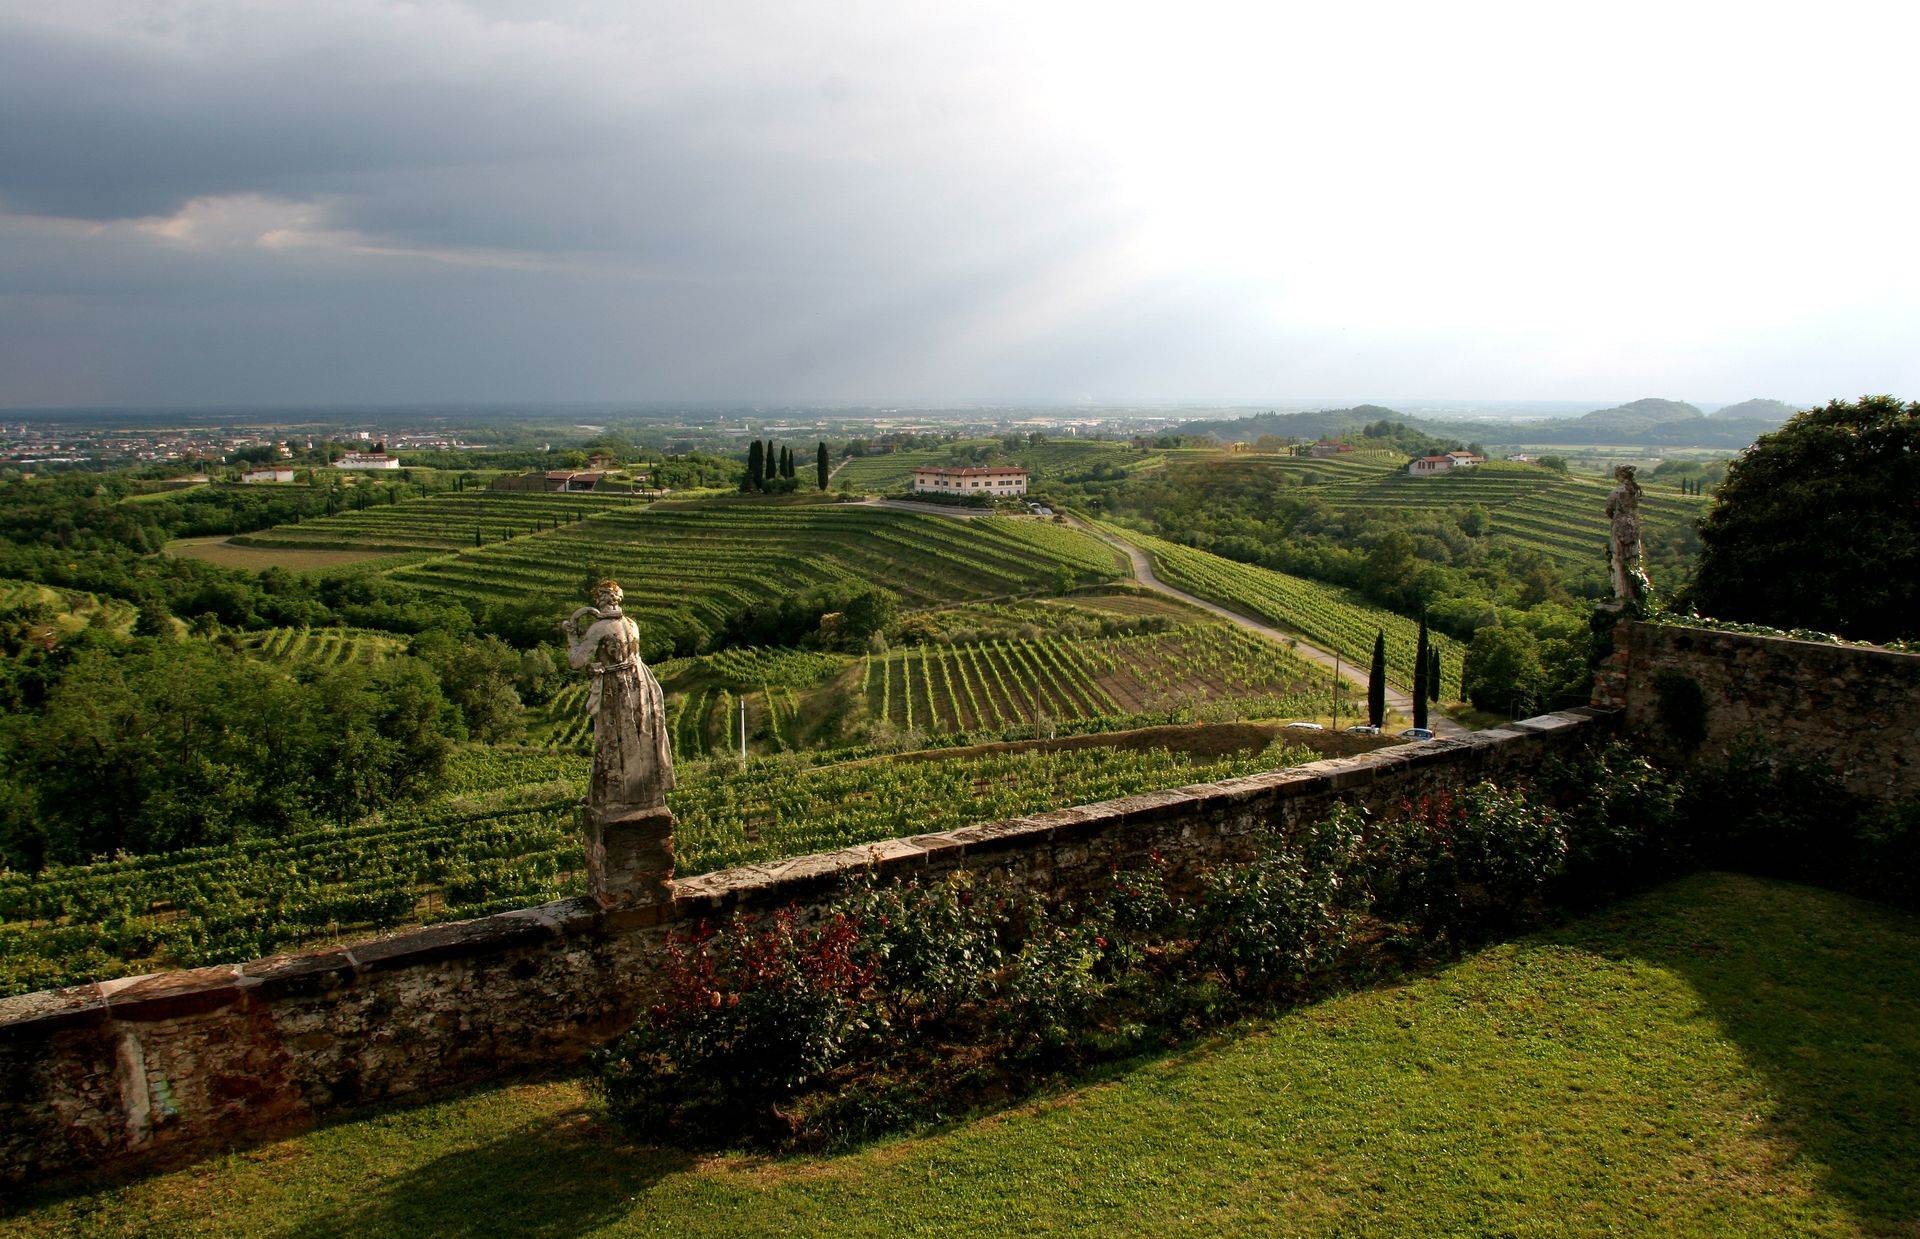 The view from Rosazzo Abbey (Image: Luigi Vitale)